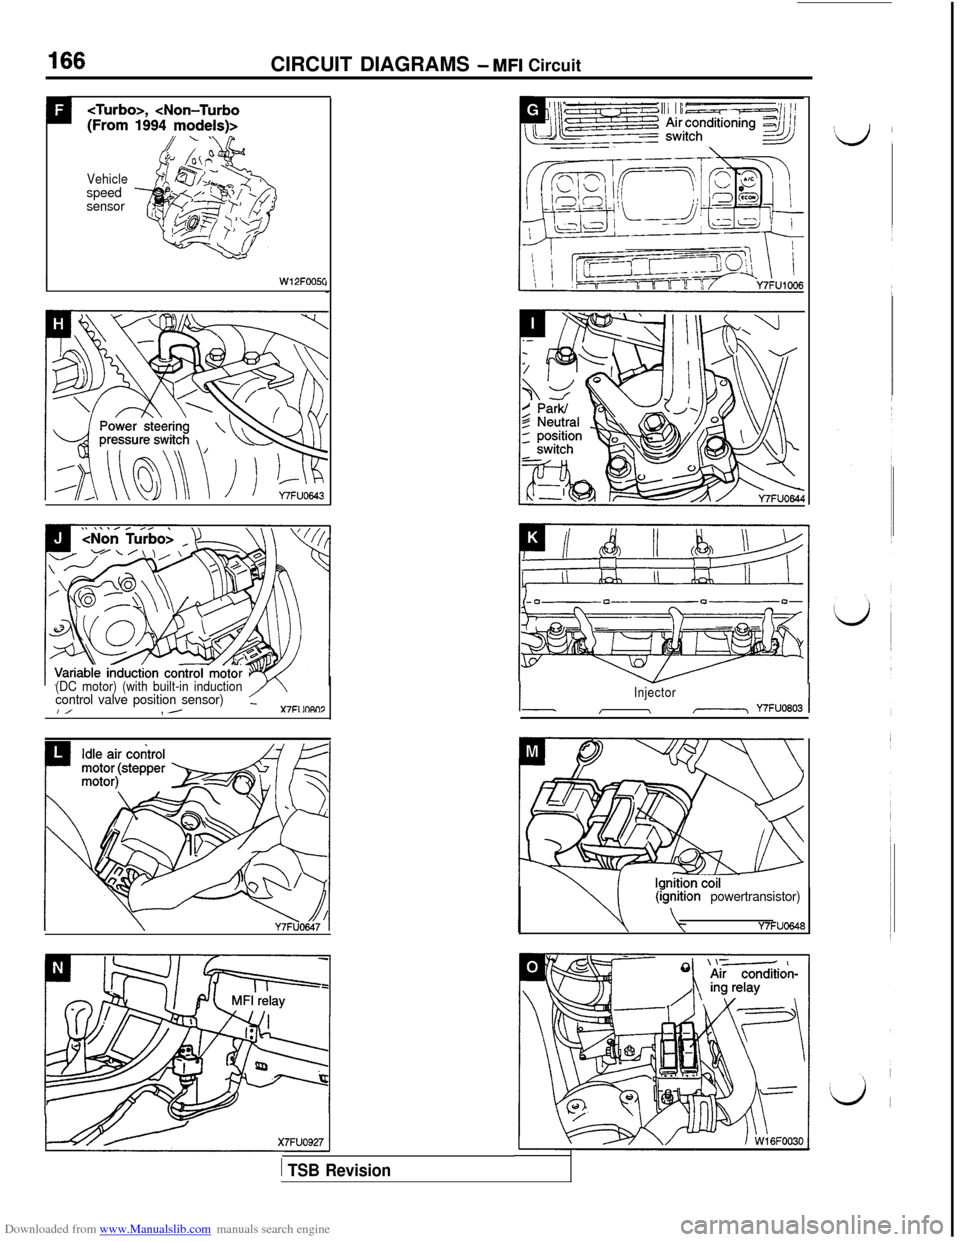 MITSUBISHI 3000GT 1994 2.G Workshop Manual Downloaded from www.Manualslib.com manuals search engine CIRCUIT DIAGRAMS - MFI Circuit
<Turbo>, <Non-Turbo(From 1994 models)>
Vehiclespeed
sensor
IW12FOOSC
(DC motor) (with built-in inductioncontrol 